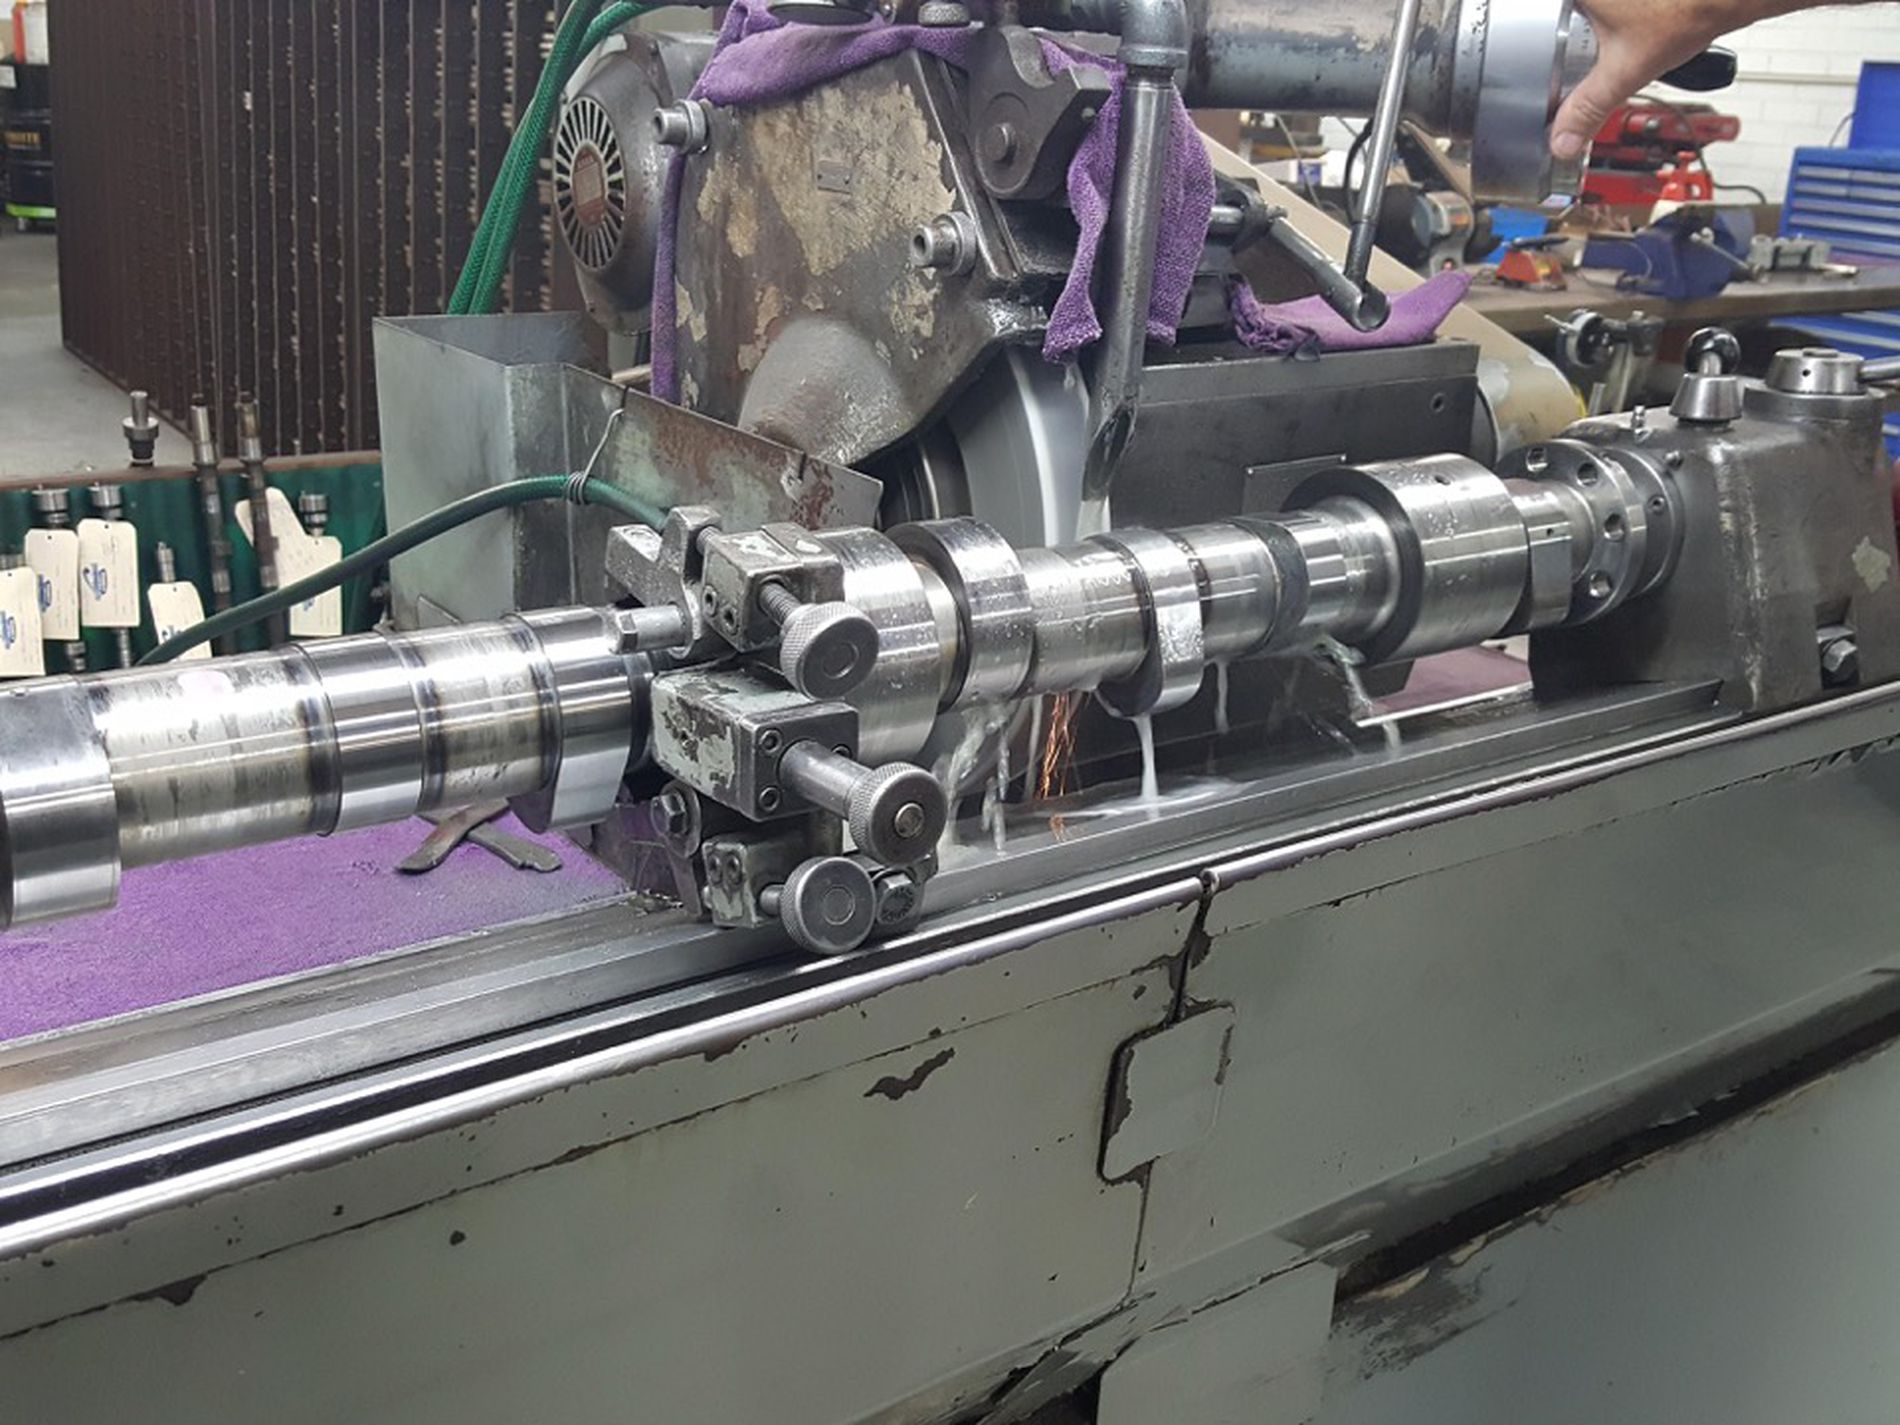 Well-Known and Respected Camshaft Grinding Business